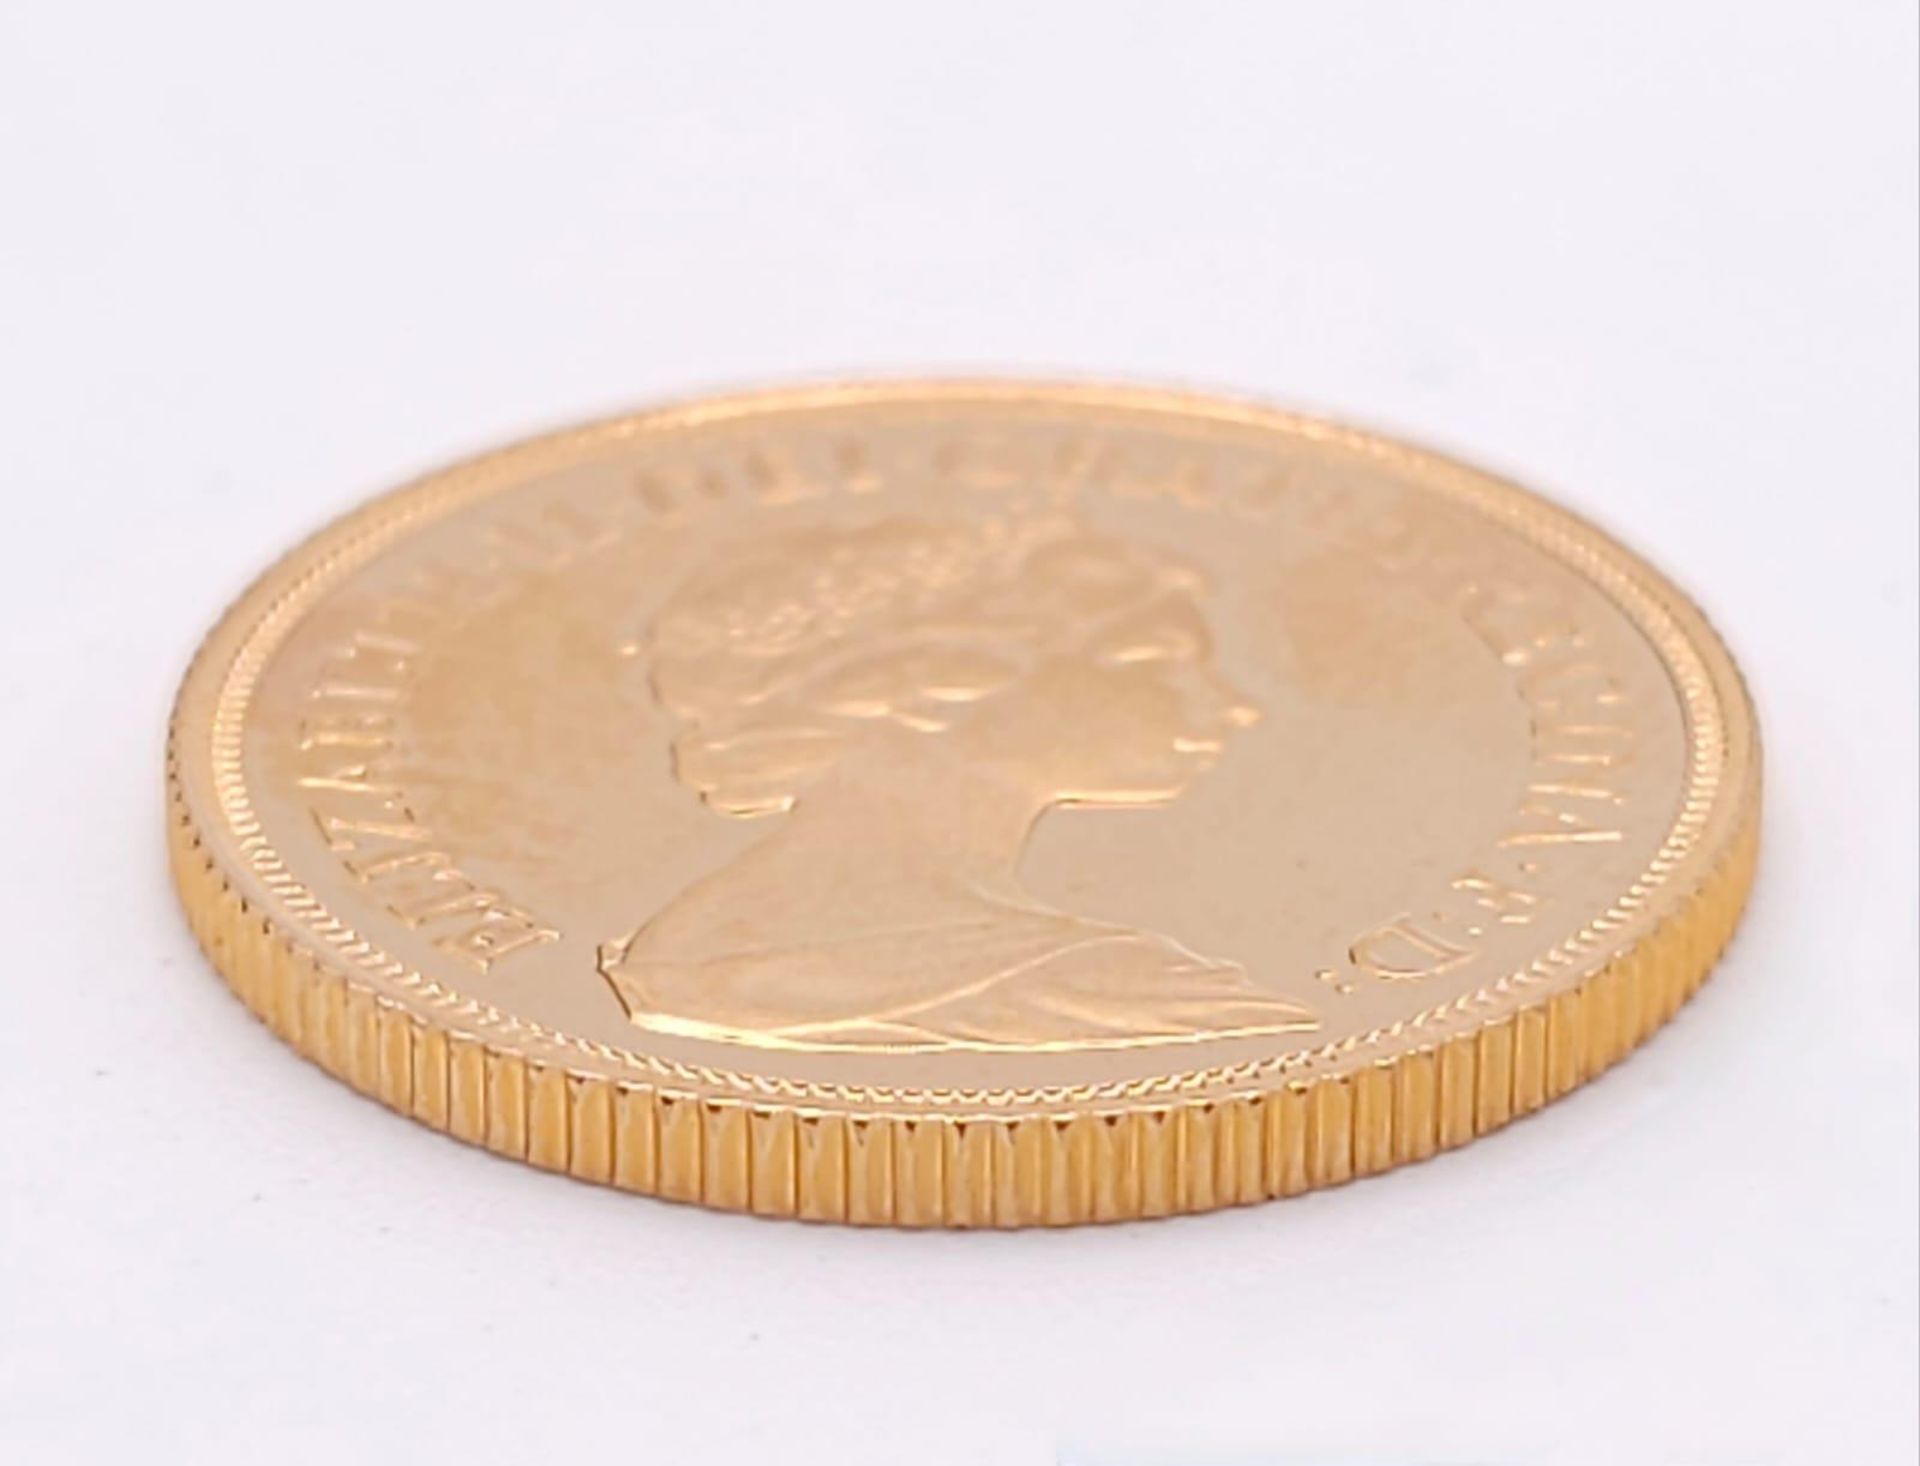 A 22K GOLD SOVEREIGN DATED 1981 IN CAPSULE AS NEW. - Image 4 of 5